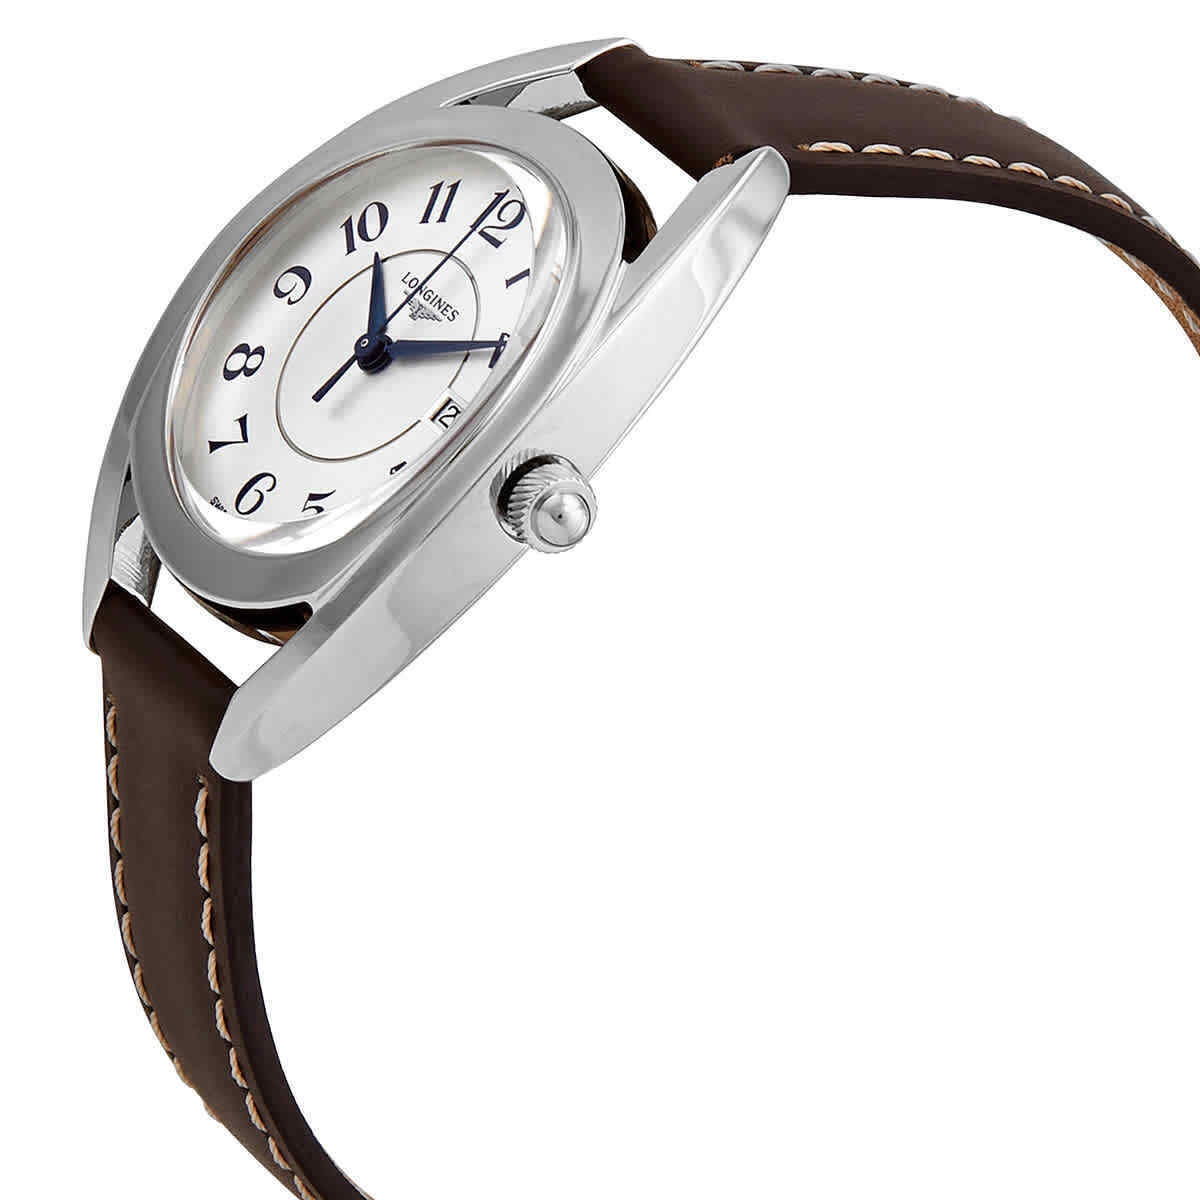 Longines Equestrian White Dial Brown Leather Strap Watch for Women - L6.136.4.73.2